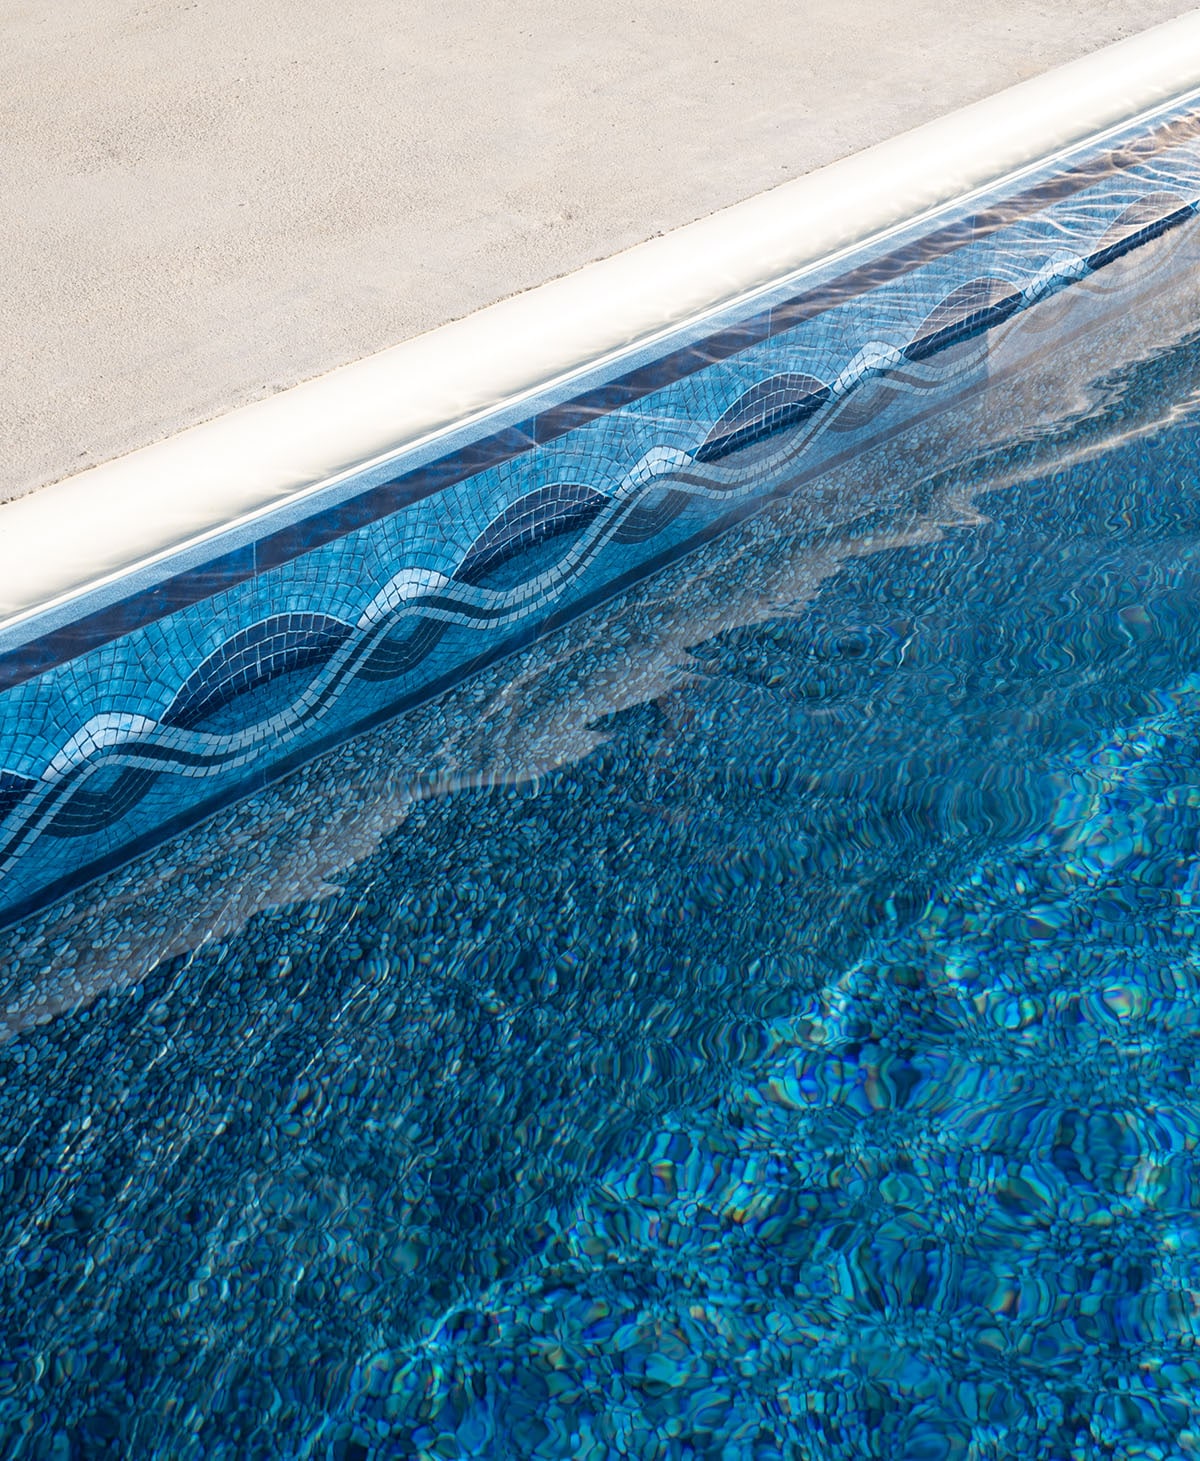 In ground pool liner patterns of the highest quality